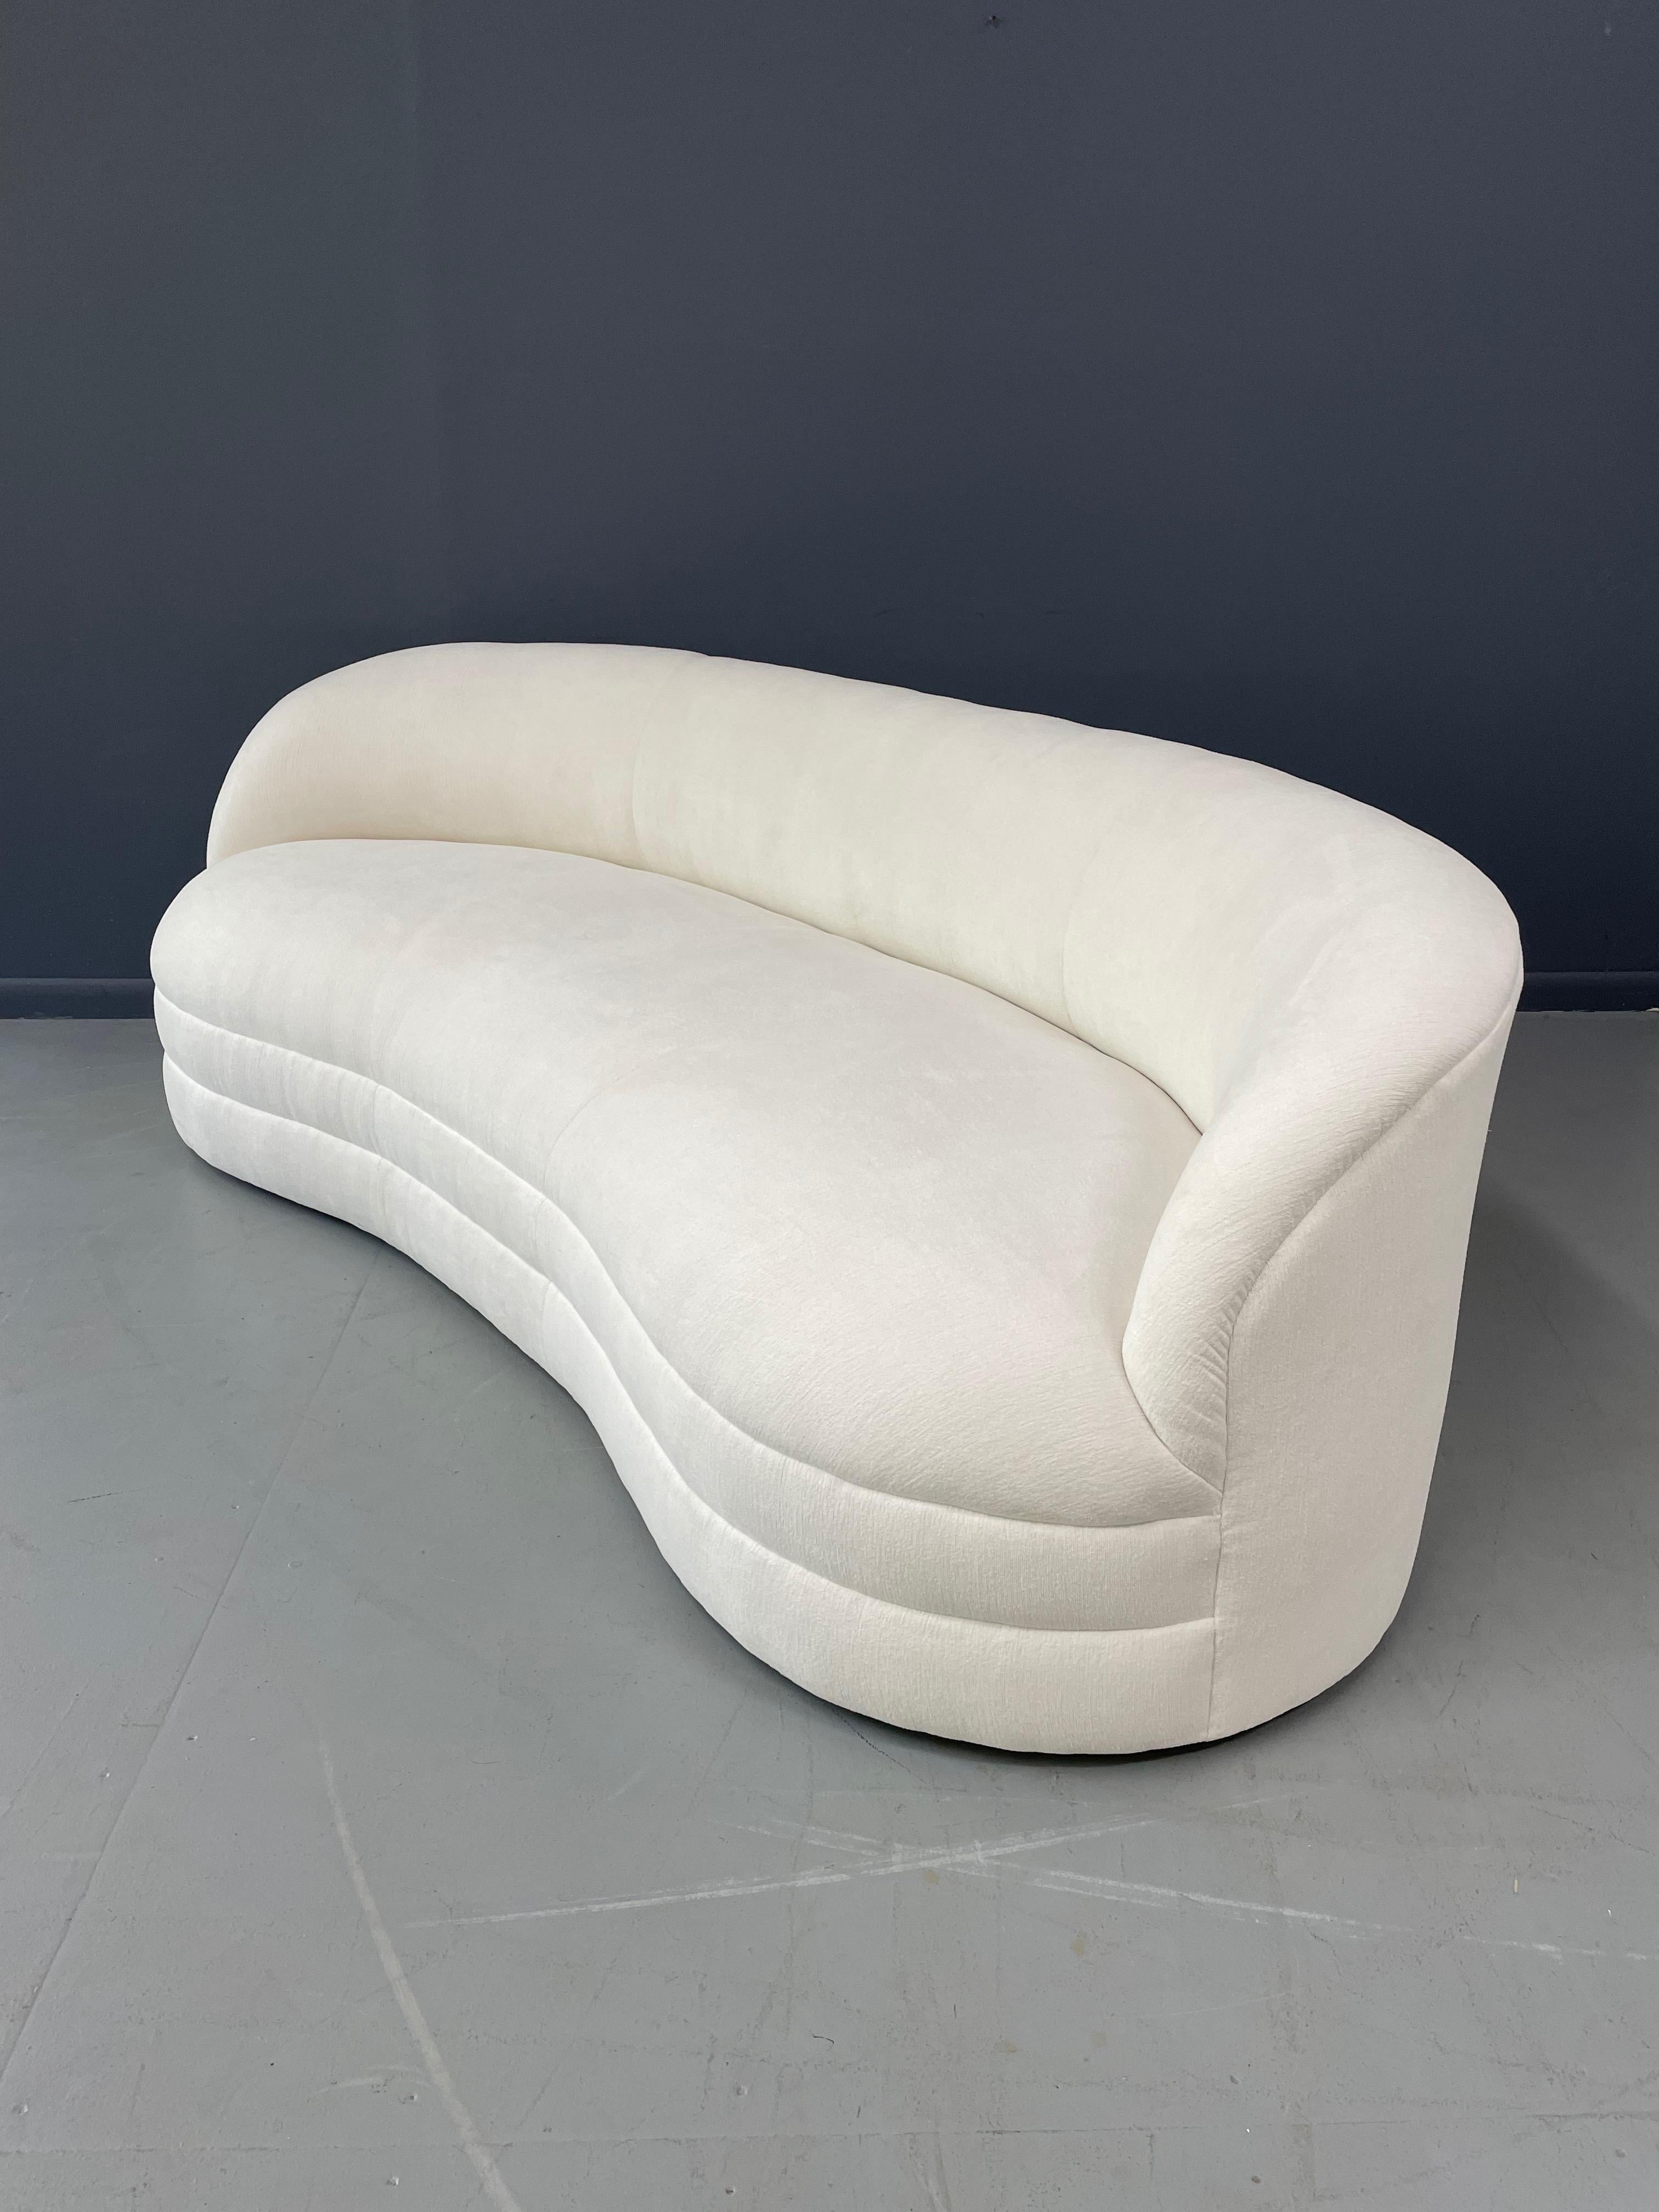 North American Weiman Style Curved Kidney Bean Shaped Mid Century Sofa in Textured White Velvet